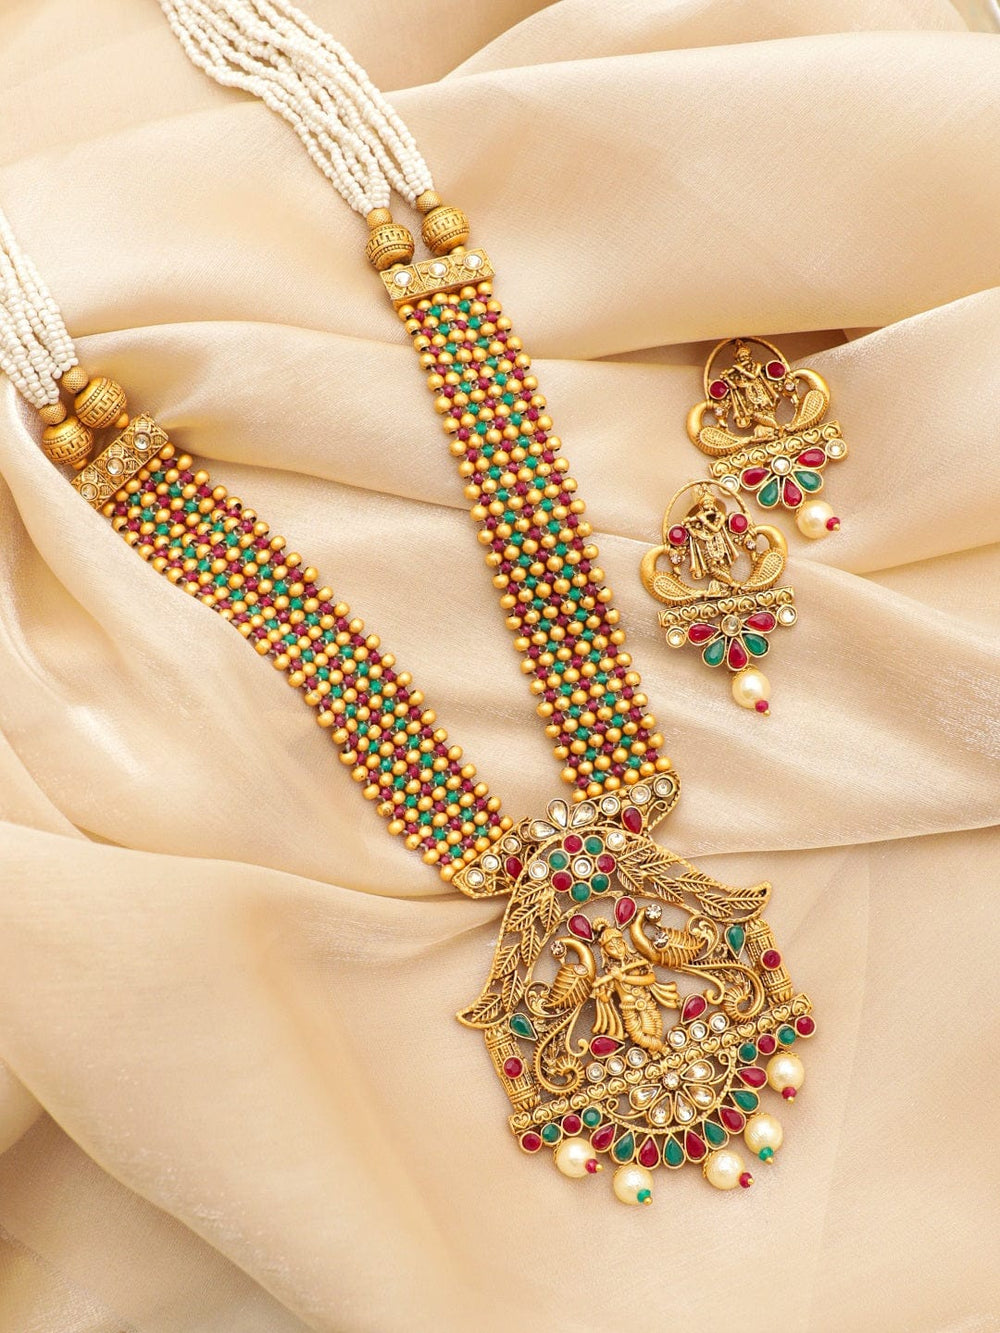 Rubans Gold-Toned Temple Jewellery Pendant Necklace Set with Multi-Colored Beads and Pearl Drops Jewellery Sets